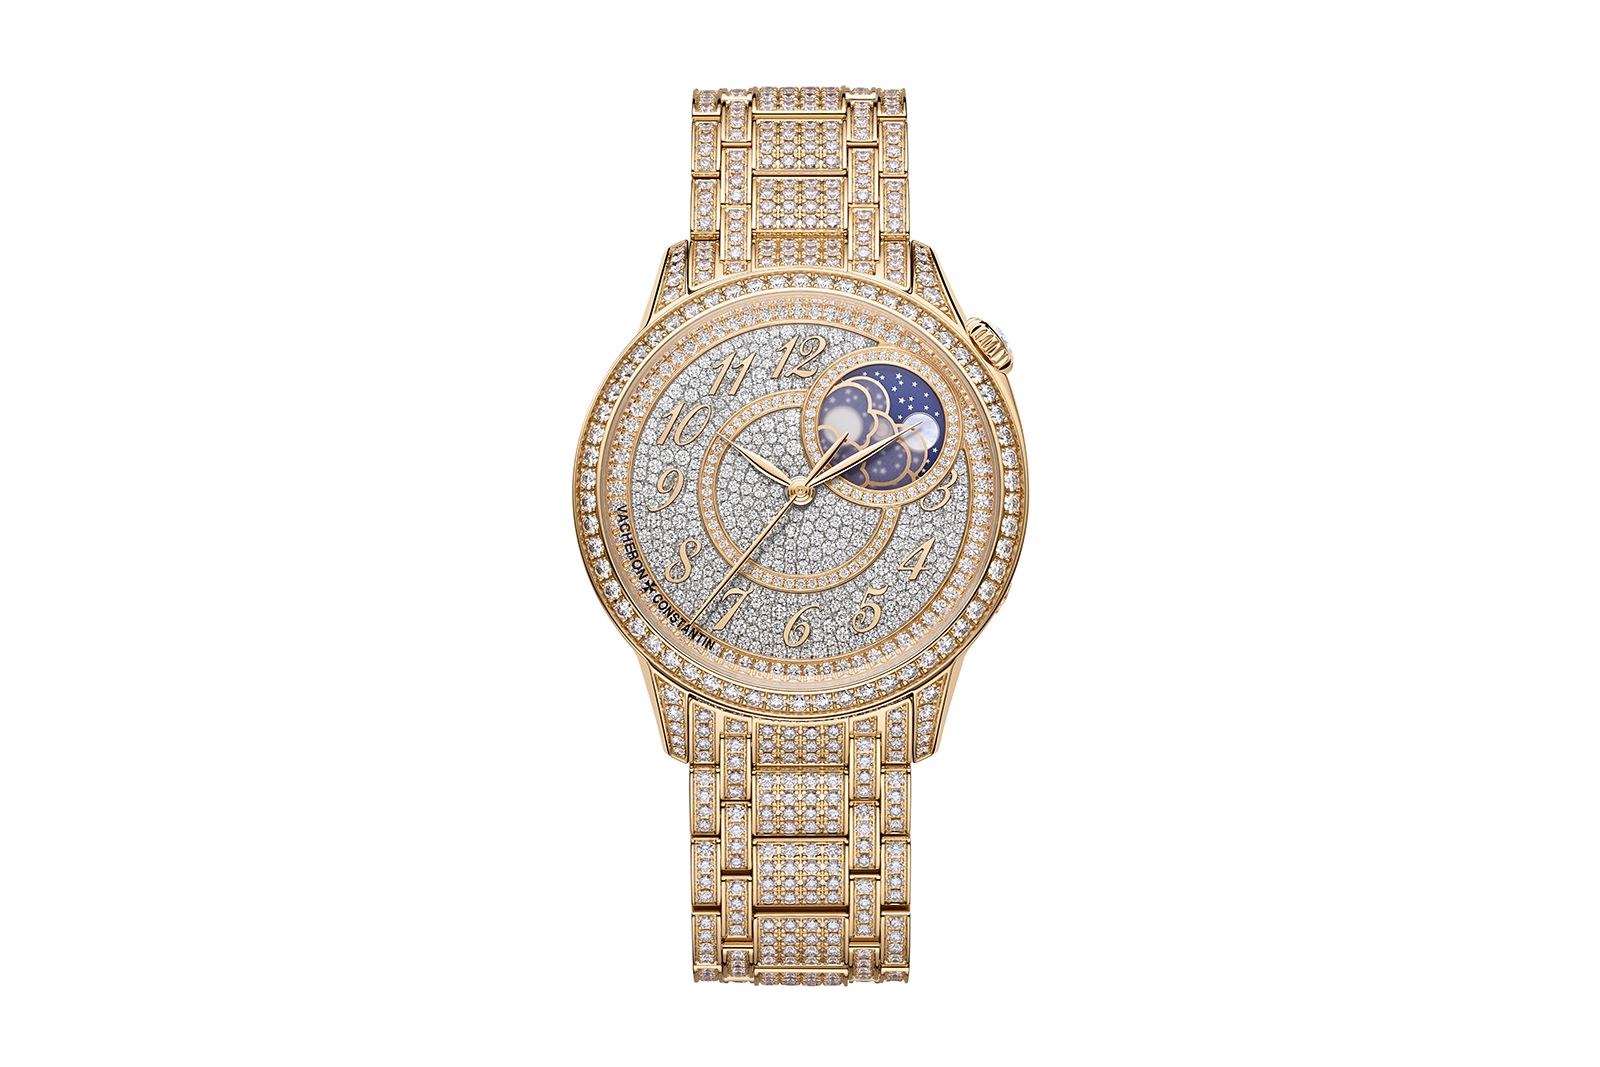 Vacheron Constantin Égérie moon phase full pavé diamond-set jewellery watch in white gold, mother-of-pearl, sapphire crystal and diamond 